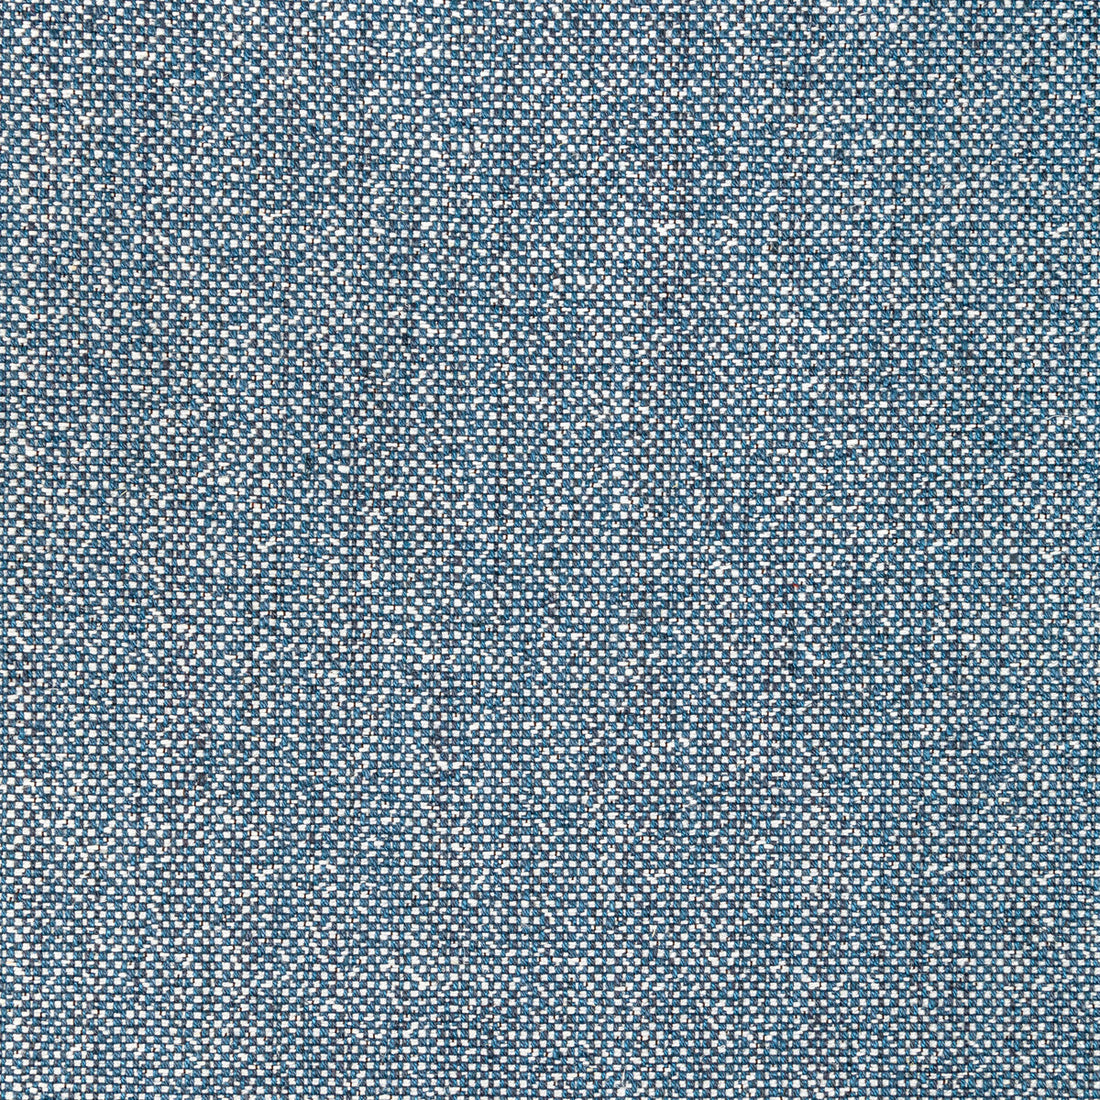 Rospico Plain fabric in navy color - pattern 8022110.50.0 - by Brunschwig &amp; Fils in the Lorient Weaves collection